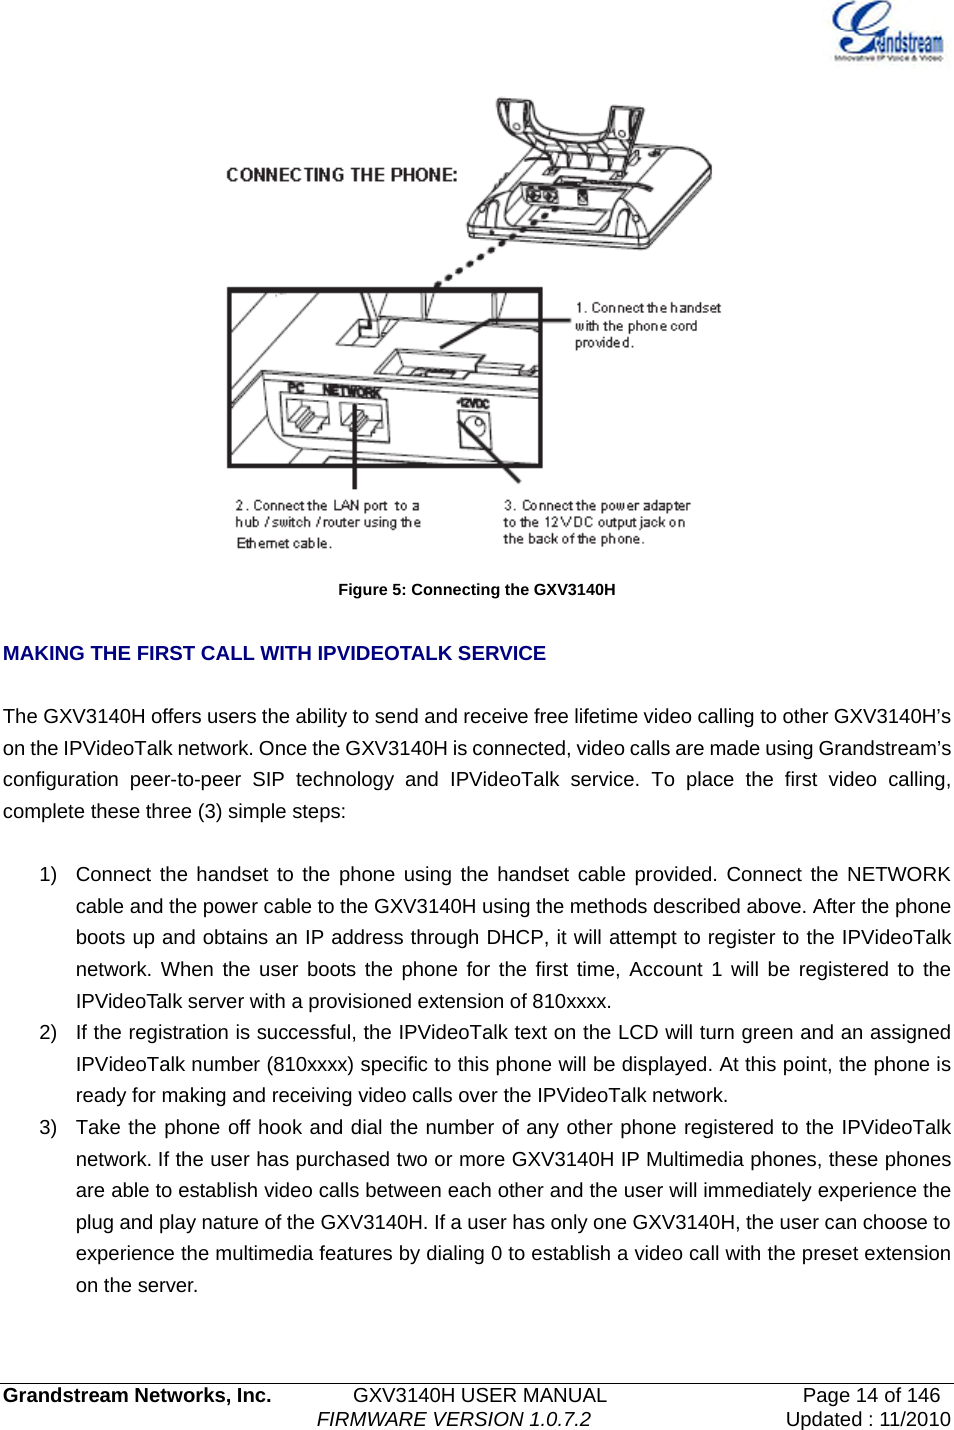   Grandstream Networks, Inc.        GXV3140H USER MANUAL                  Page 14 of 146                                FIRMWARE VERSION 1.0.7.2 Updated : 11/2010   Figure 5: Connecting the GXV3140H  MAKING THE FIRST CALL WITH IPVIDEOTALK SERVICE  The GXV3140H offers users the ability to send and receive free lifetime video calling to other GXV3140H’s on the IPVideoTalk network. Once the GXV3140H is connected, video calls are made using Grandstream’s configuration peer-to-peer SIP technology and IPVideoTalk service. To place the first video calling, complete these three (3) simple steps:    1)  Connect the handset to the phone using the handset cable provided. Connect the NETWORK cable and the power cable to the GXV3140H using the methods described above. After the phone boots up and obtains an IP address through DHCP, it will attempt to register to the IPVideoTalk network. When the user boots the phone for the first time, Account 1 will be registered to the IPVideoTalk server with a provisioned extension of 810xxxx. 2)  If the registration is successful, the IPVideoTalk text on the LCD will turn green and an assigned IPVideoTalk number (810xxxx) specific to this phone will be displayed. At this point, the phone is ready for making and receiving video calls over the IPVideoTalk network. 3)  Take the phone off hook and dial the number of any other phone registered to the IPVideoTalk network. If the user has purchased two or more GXV3140H IP Multimedia phones, these phones are able to establish video calls between each other and the user will immediately experience the plug and play nature of the GXV3140H. If a user has only one GXV3140H, the user can choose to experience the multimedia features by dialing 0 to establish a video call with the preset extension on the server.   